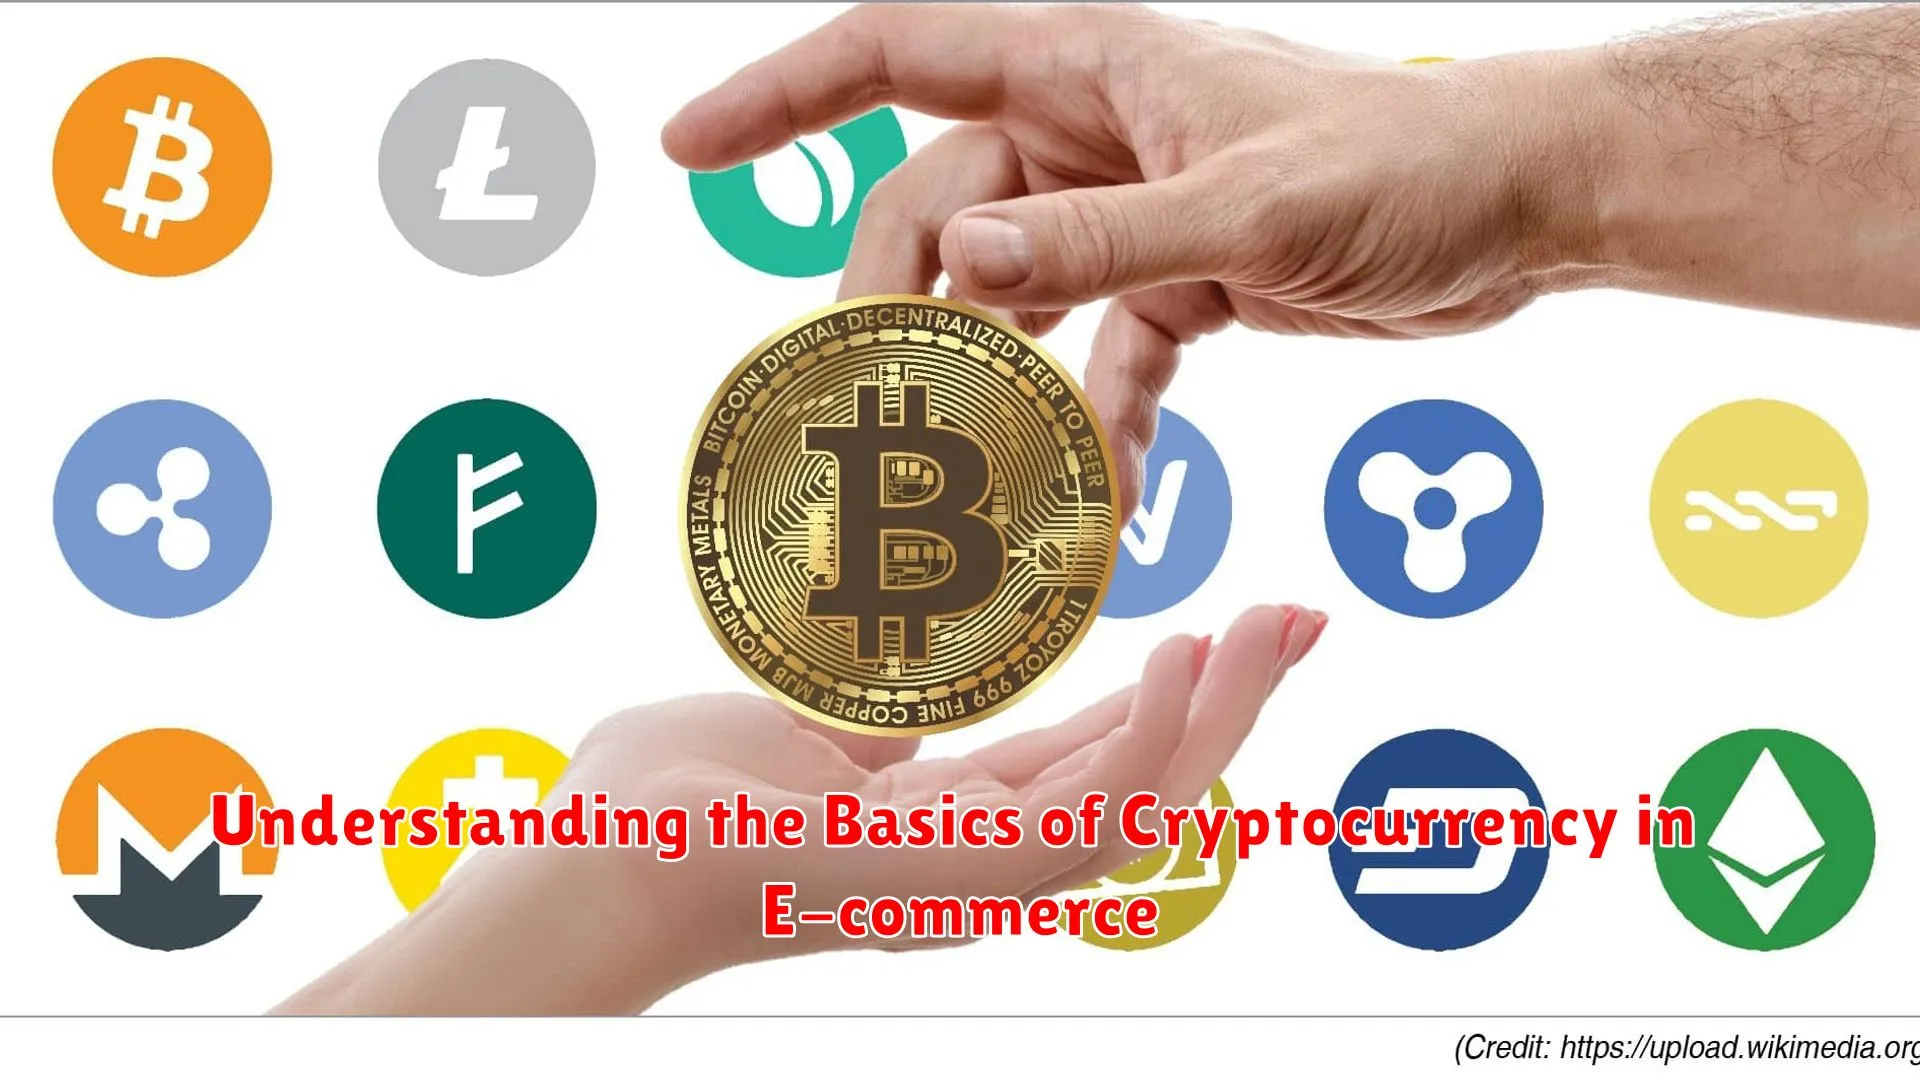 Understanding the Basics of Cryptocurrency in E-commerce